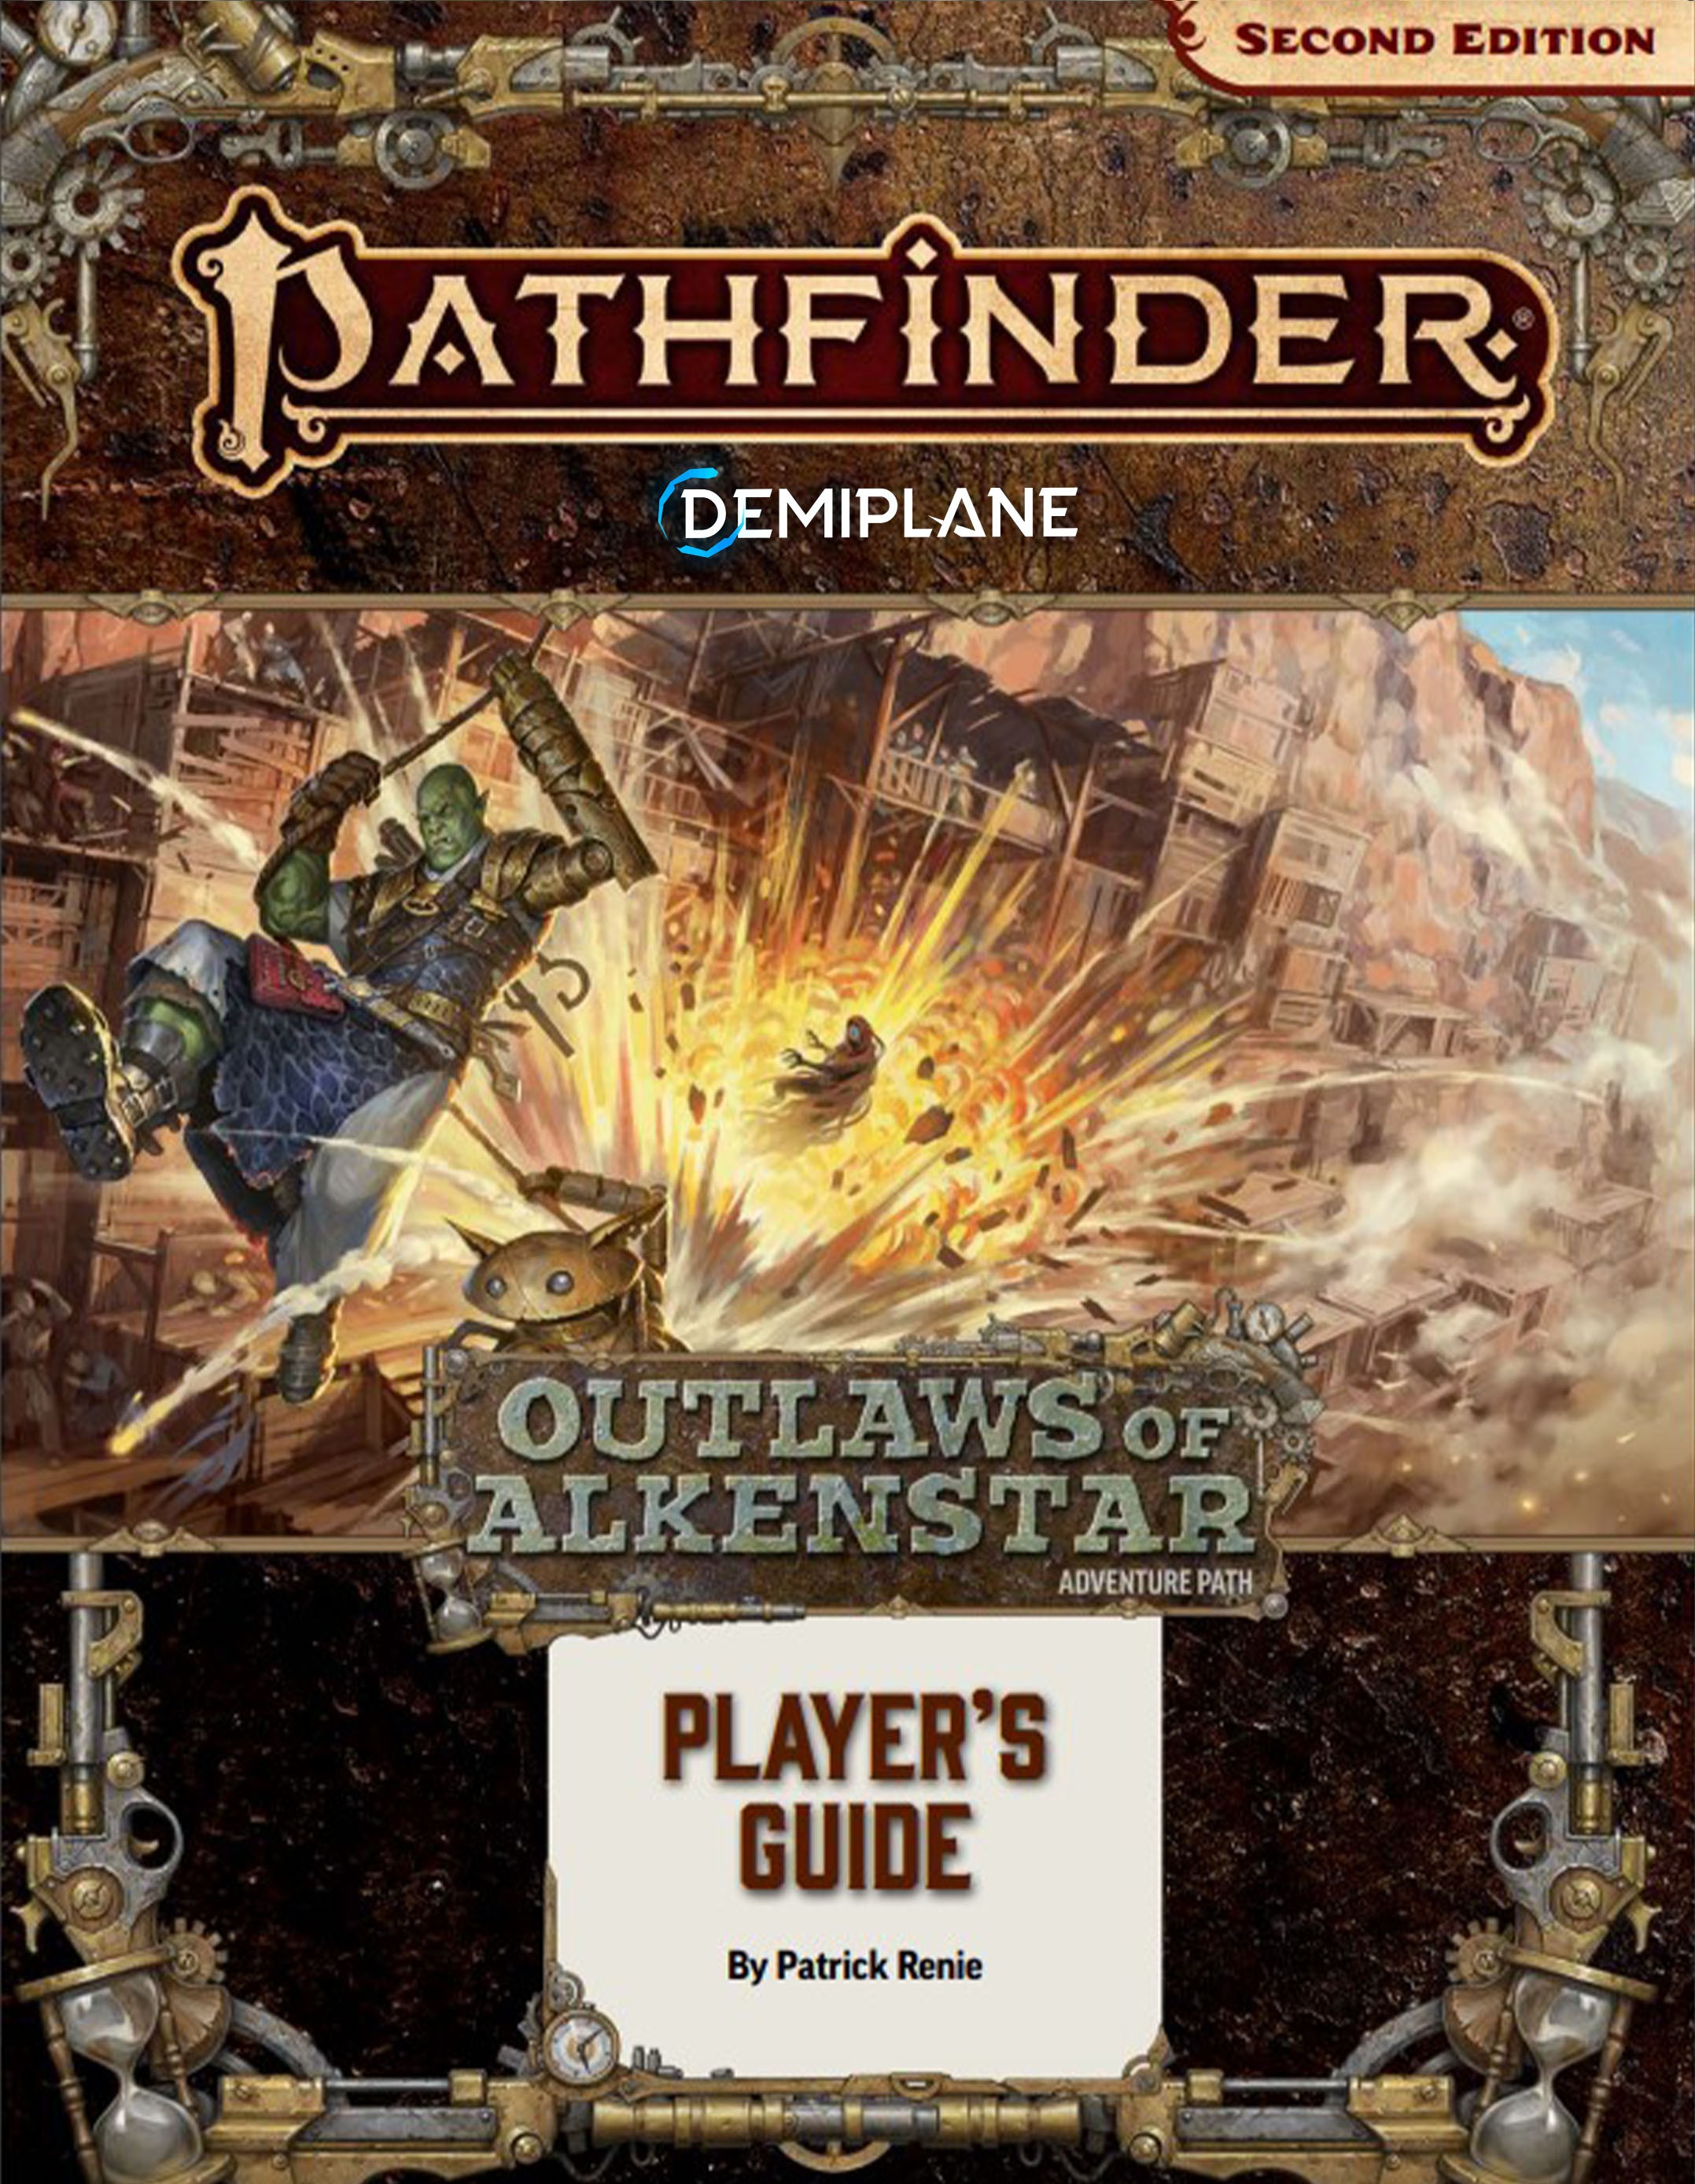 Outlaws of Alkenstar: Player's Guide